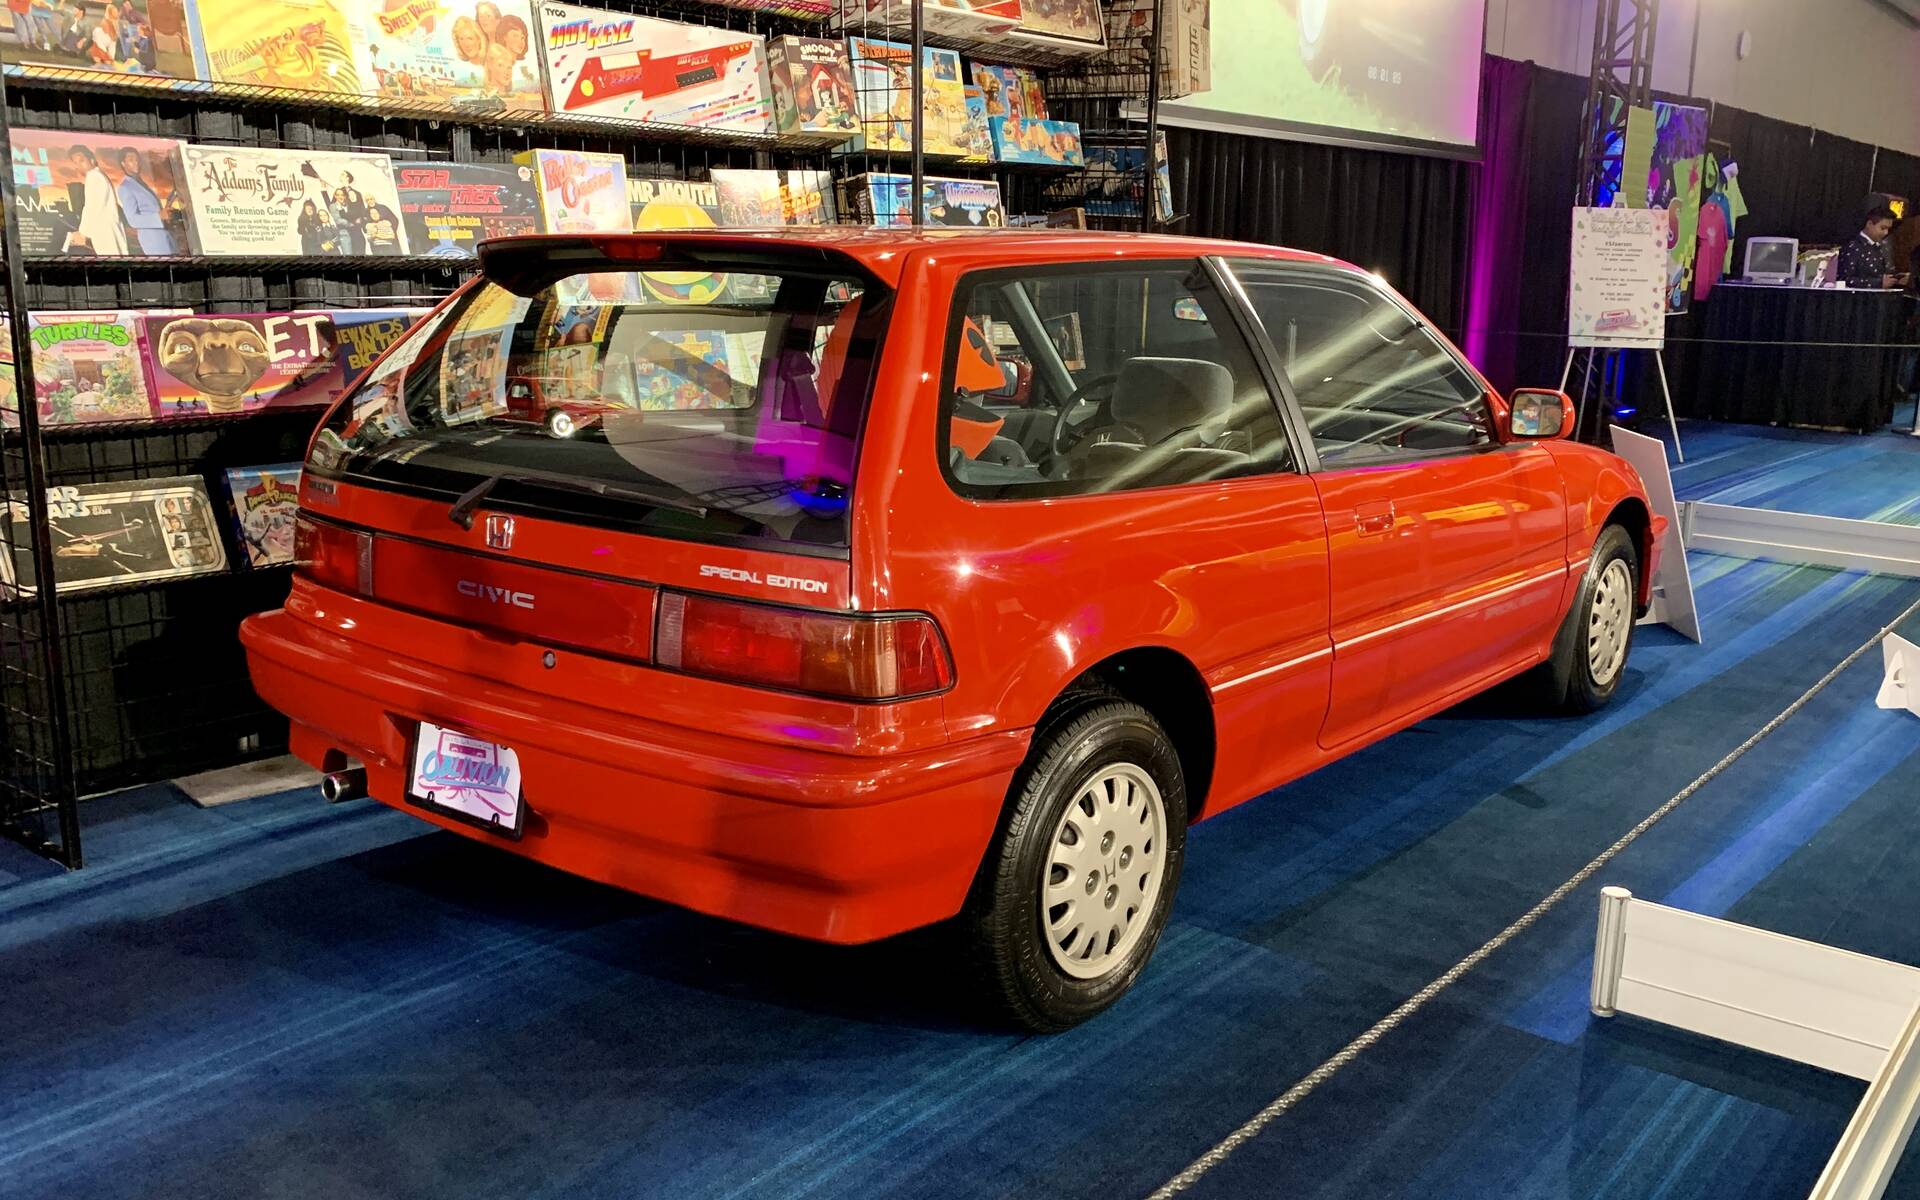 <p><strong>1991 Honda Civic Special Edition</strong></p>